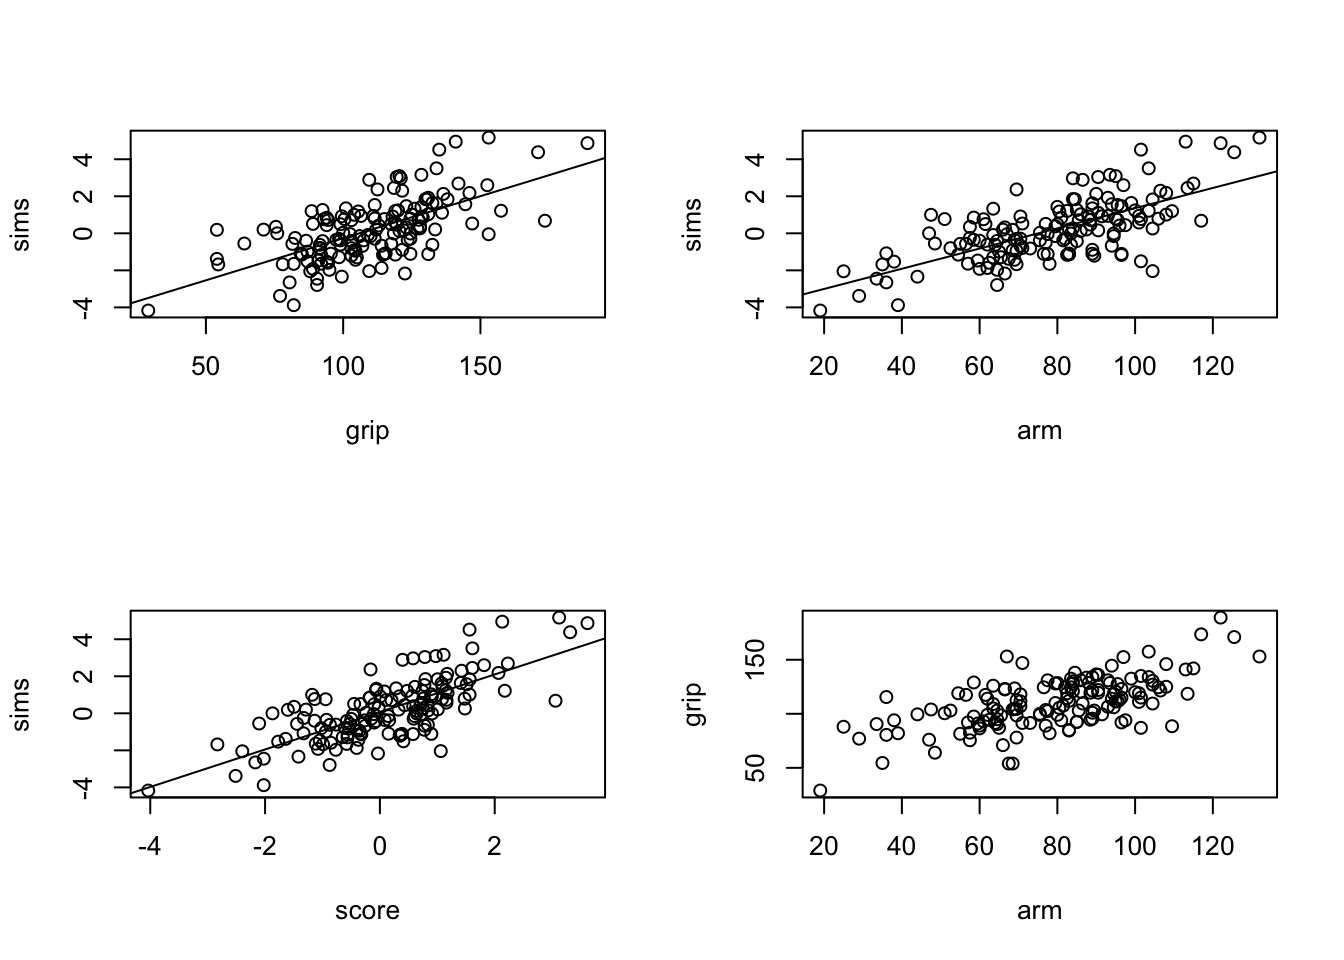 Scatter Plots and Regression Lines